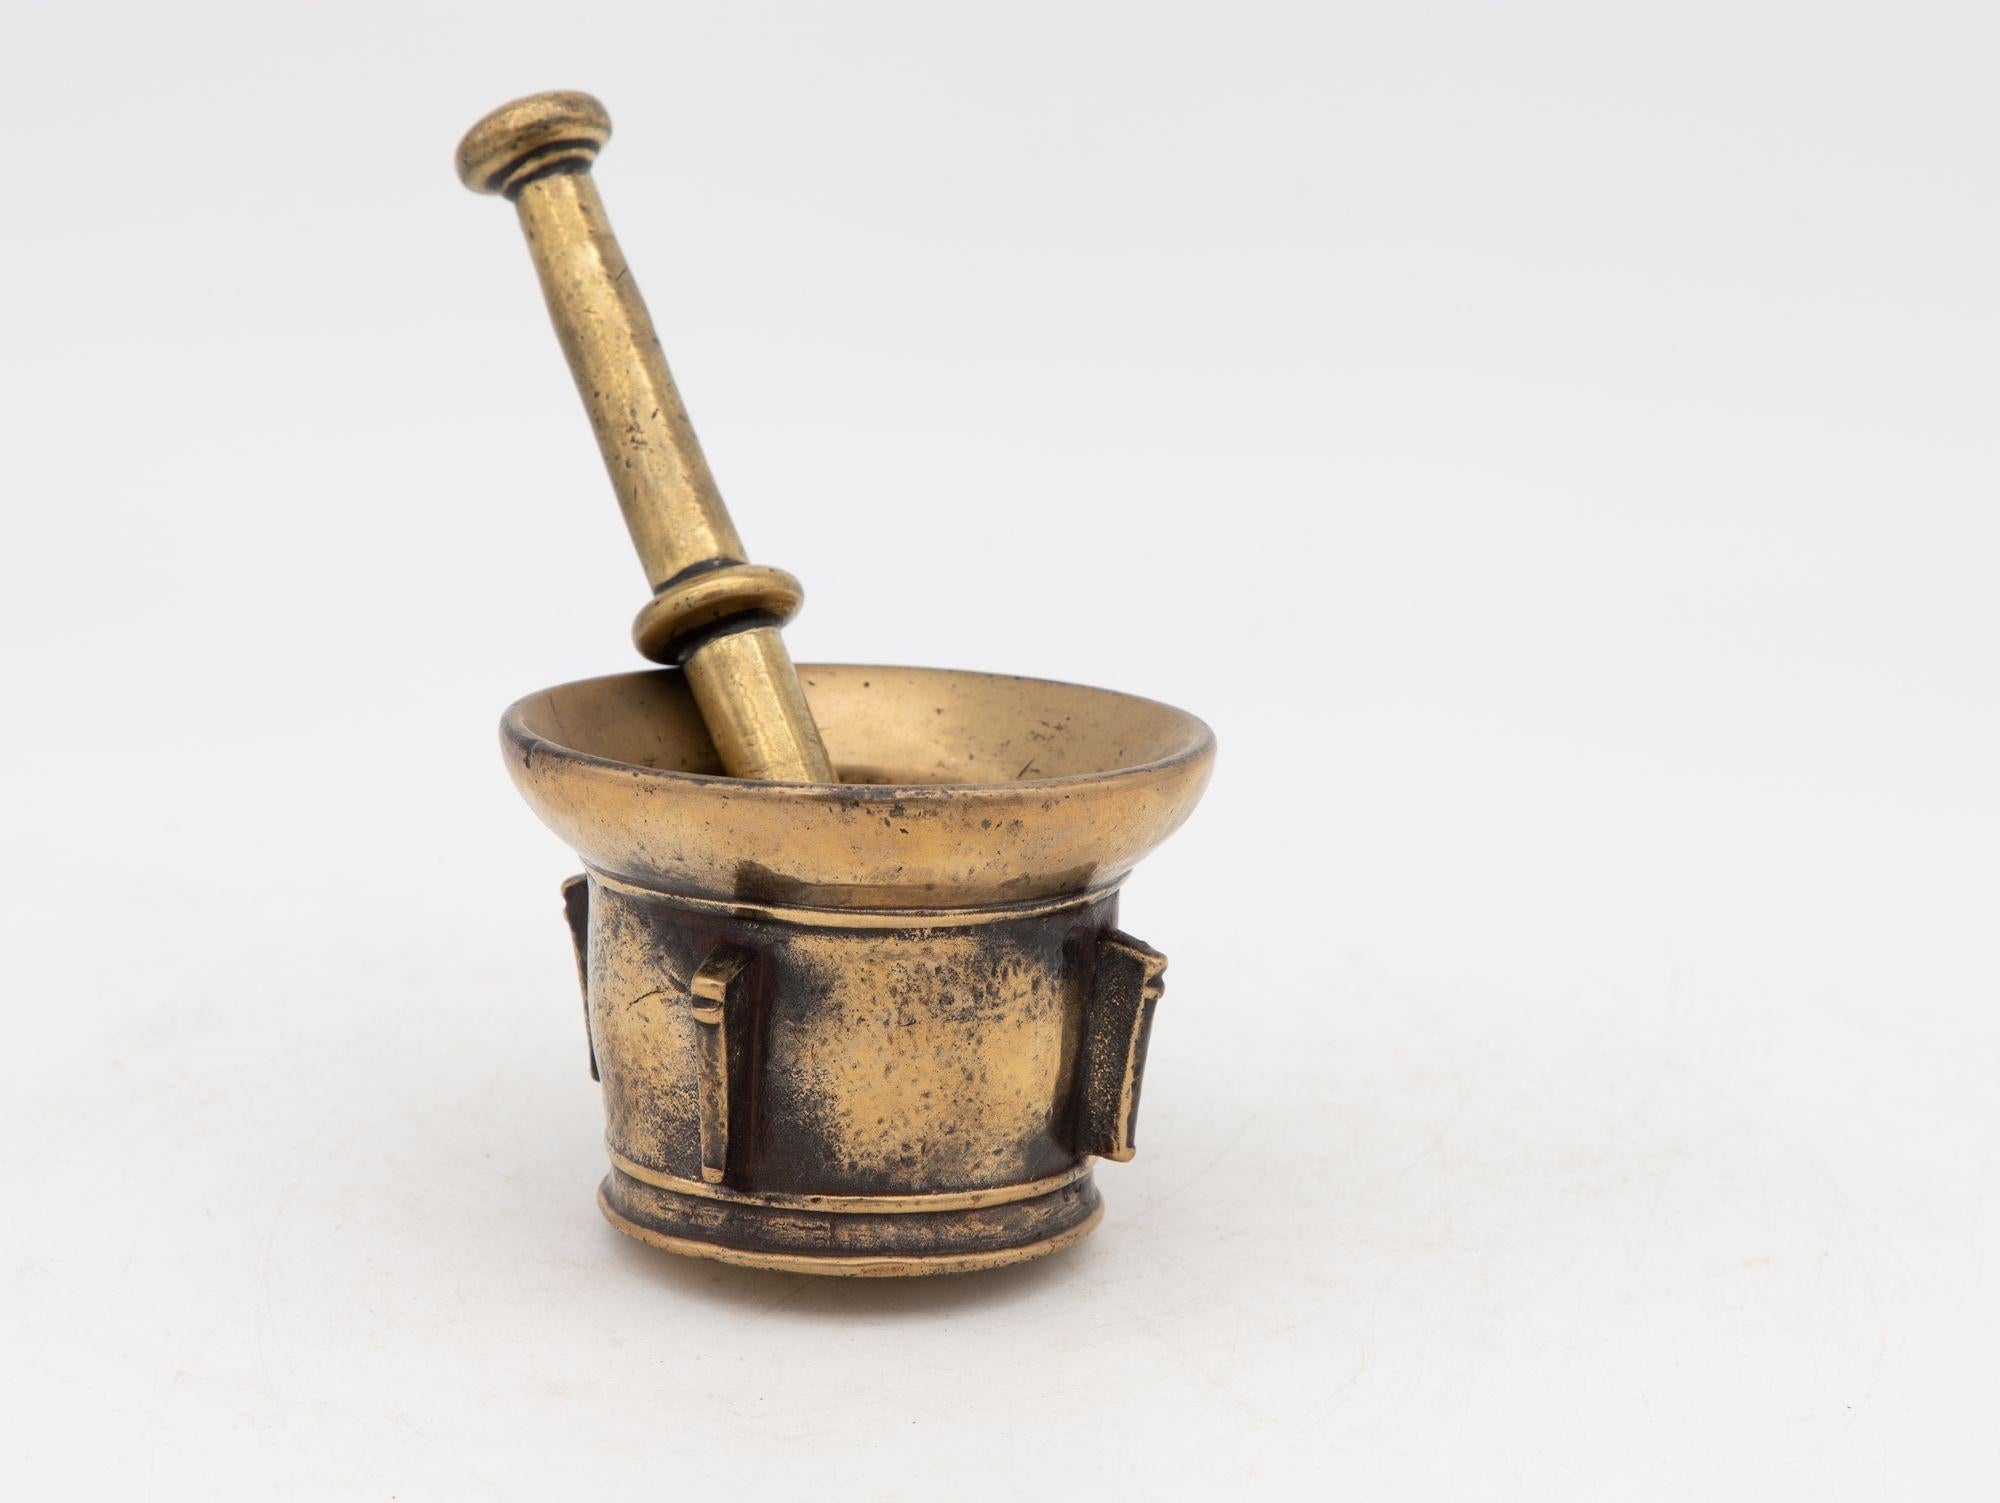 This early 20th-century mortar and pestle is made of brass with an honest patina. Both the mortar and pestle are traditional in style. The mortar has a classic bell-shaped body and the pestle has two rounded ends. Brass mortar and pestles were used